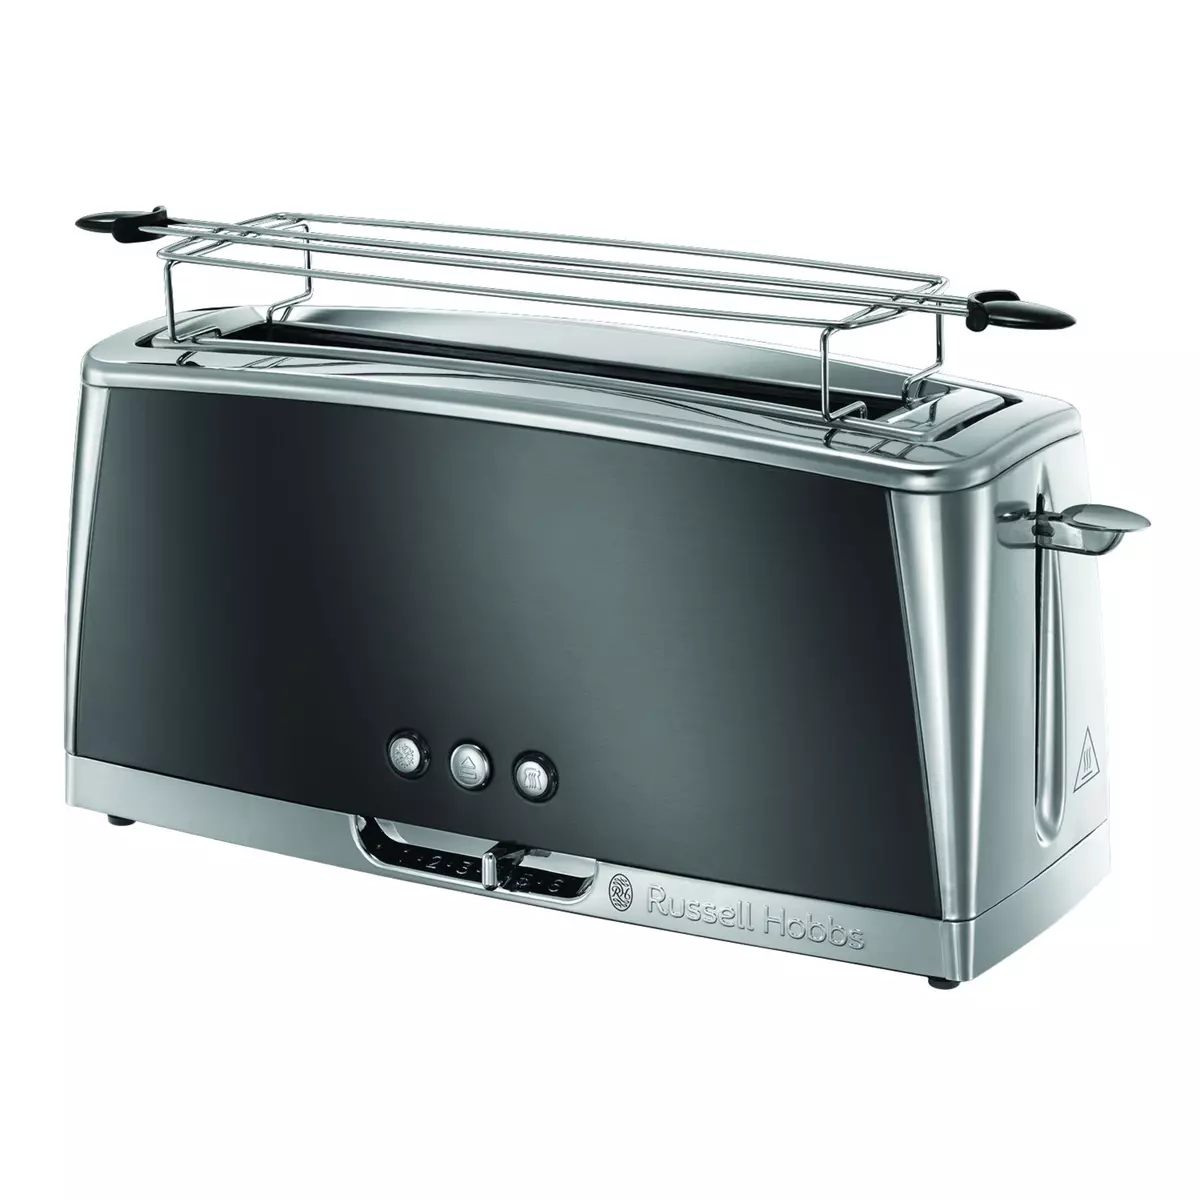 RUSSELL HOBBS Grille-pain Luna 23251-56, Gris